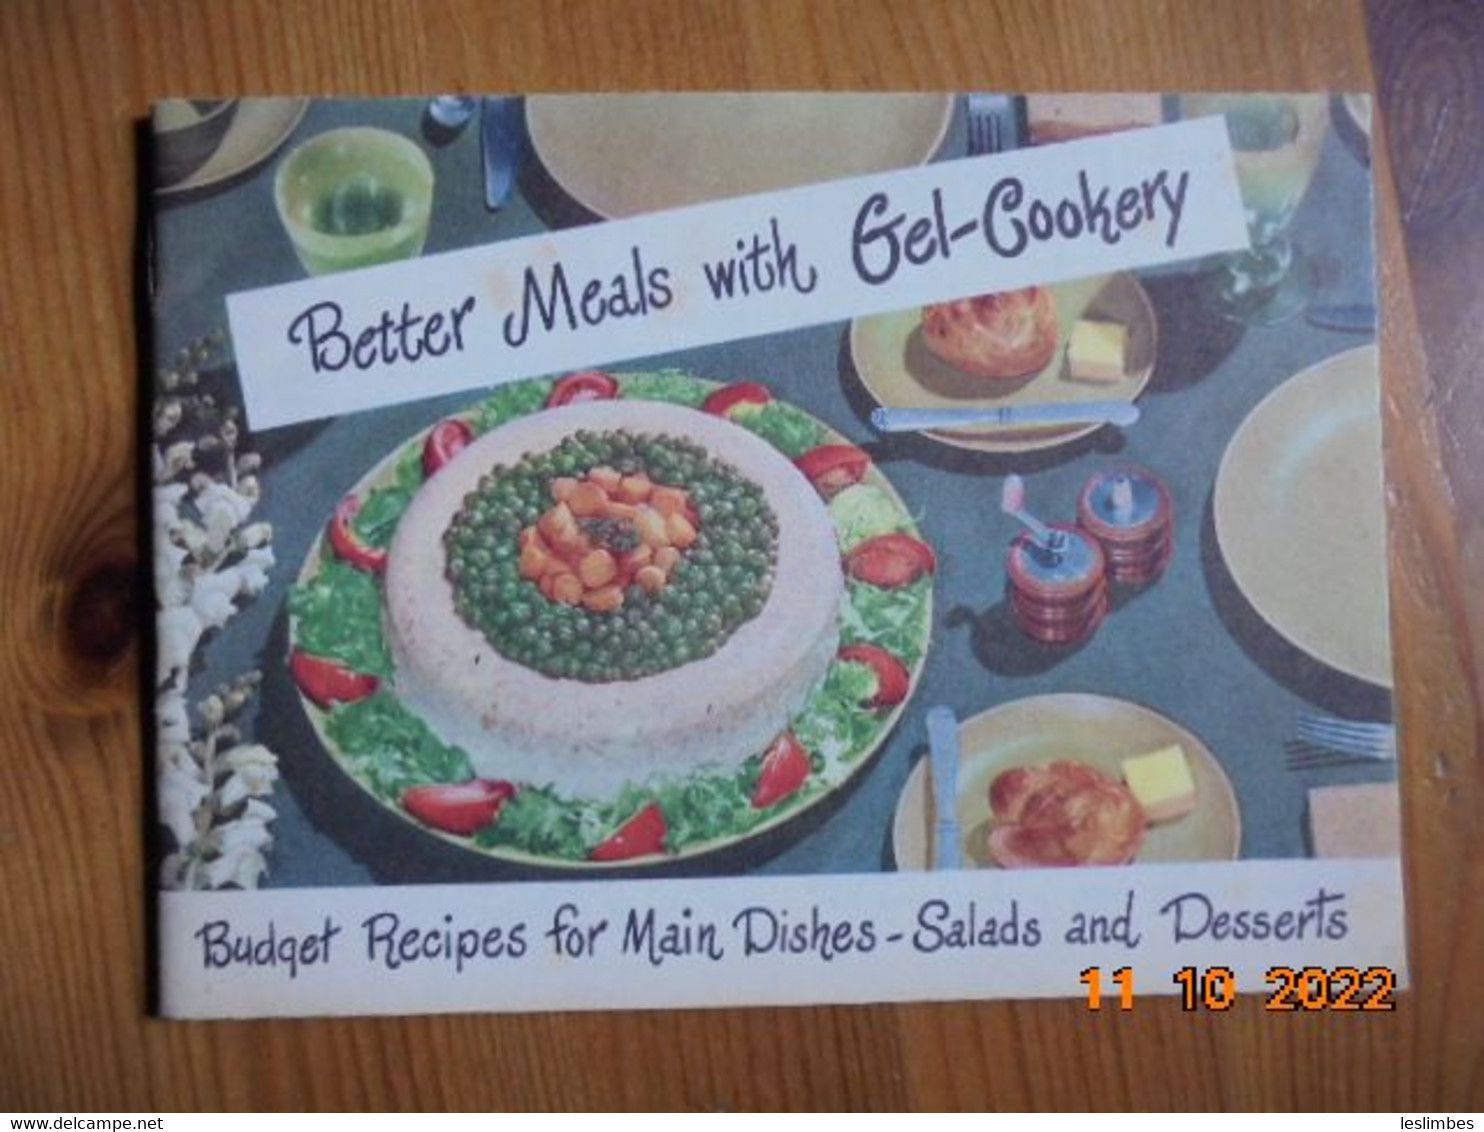 Better Meals With Gel Cookery : Budget Recipes For Main Dishes, Salads And Desserts. Charles B. Knox Gelatine Co. 1952 - Americana